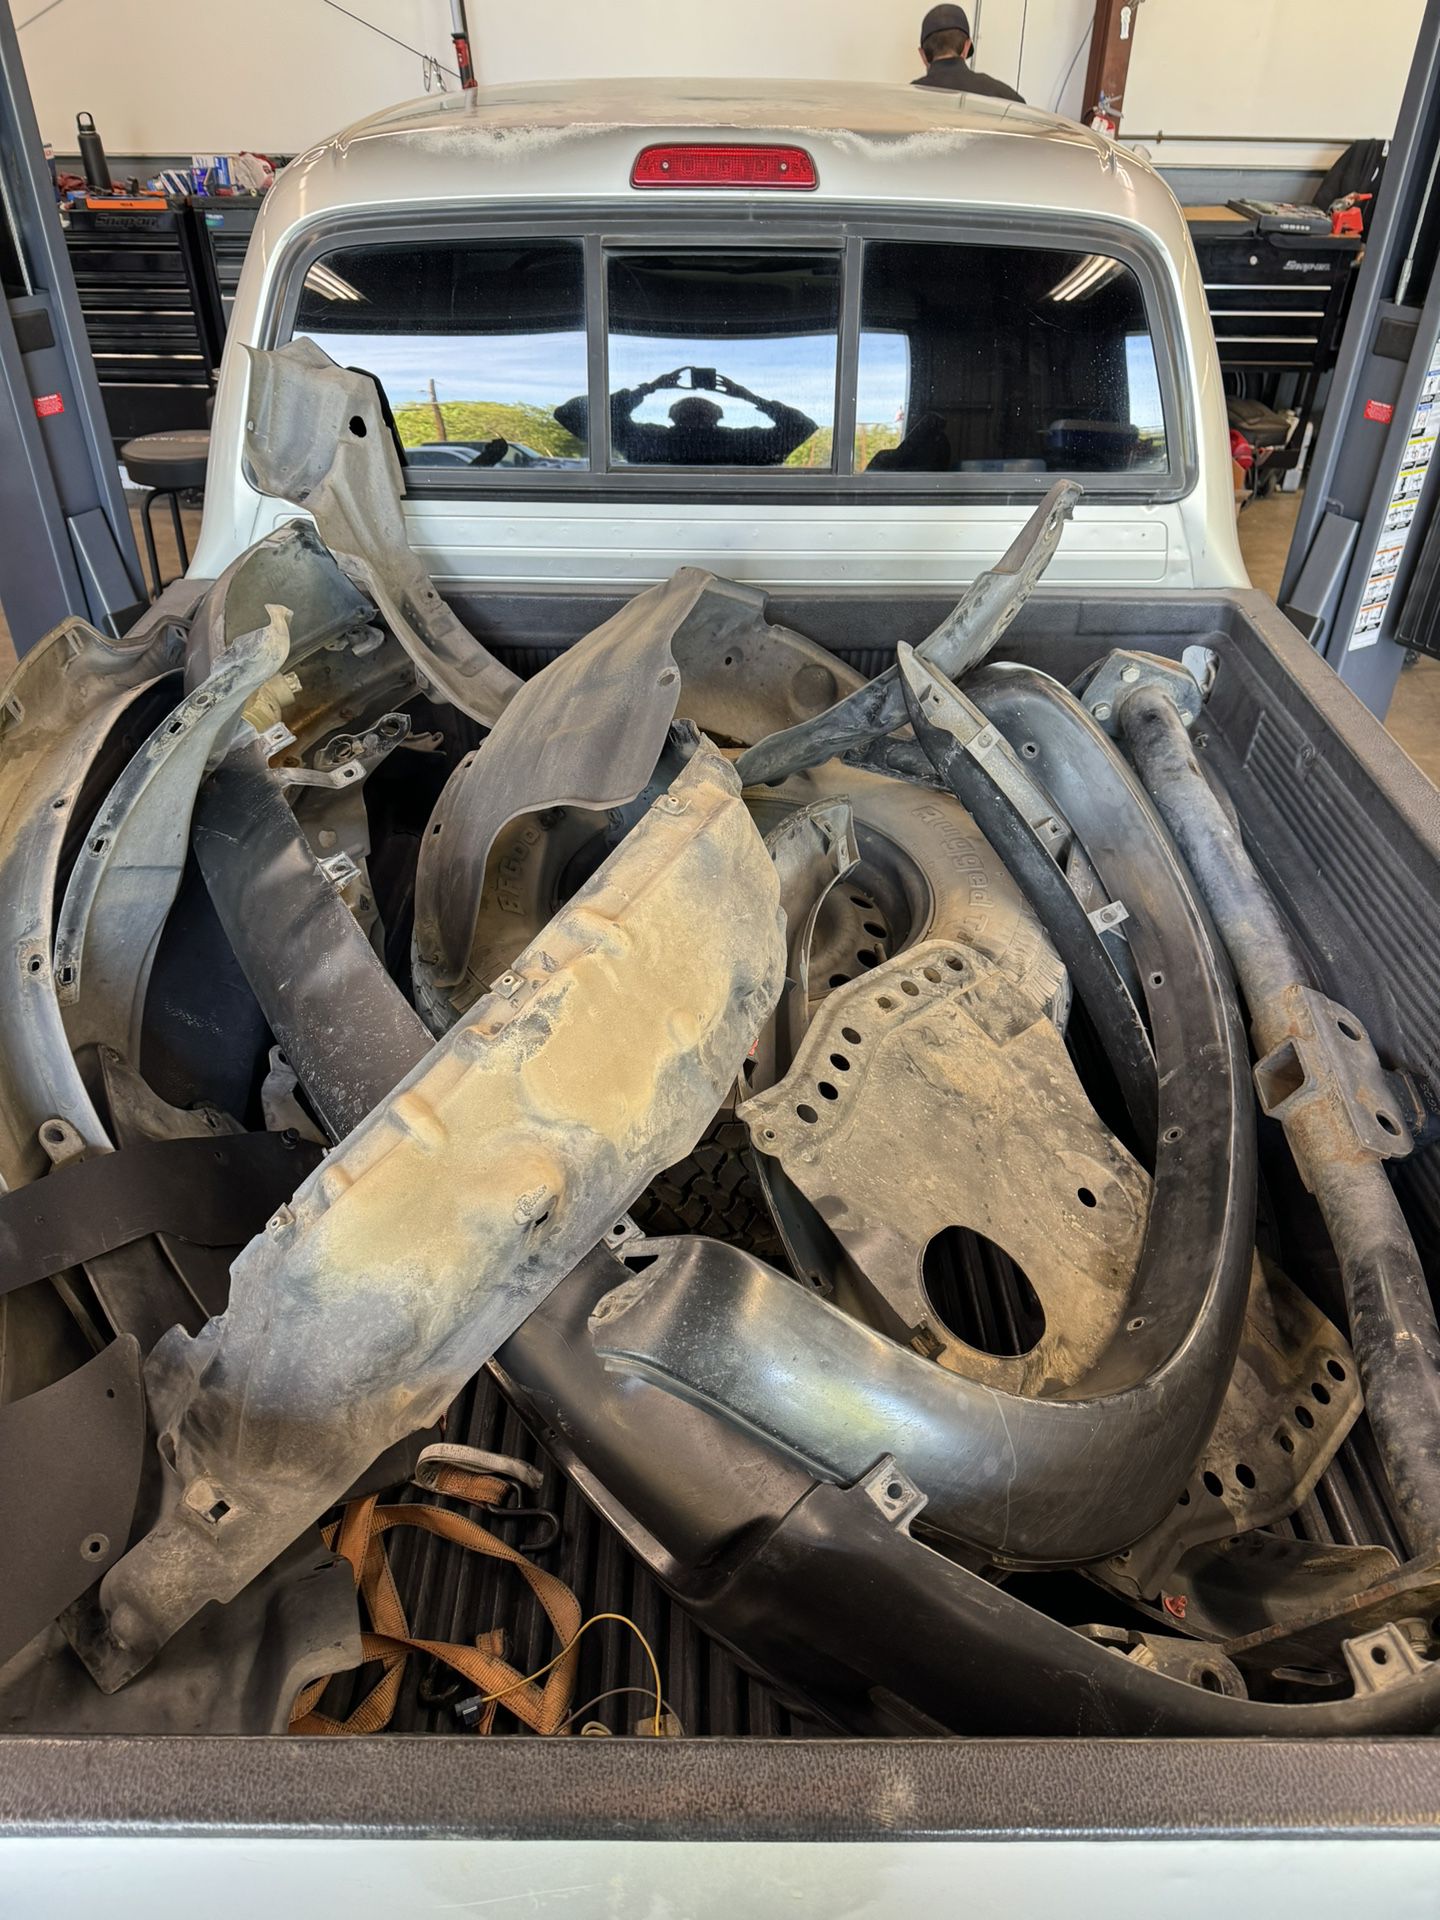 2001 Tacoma Front Diff, Driveshaft, Misc Body Parts